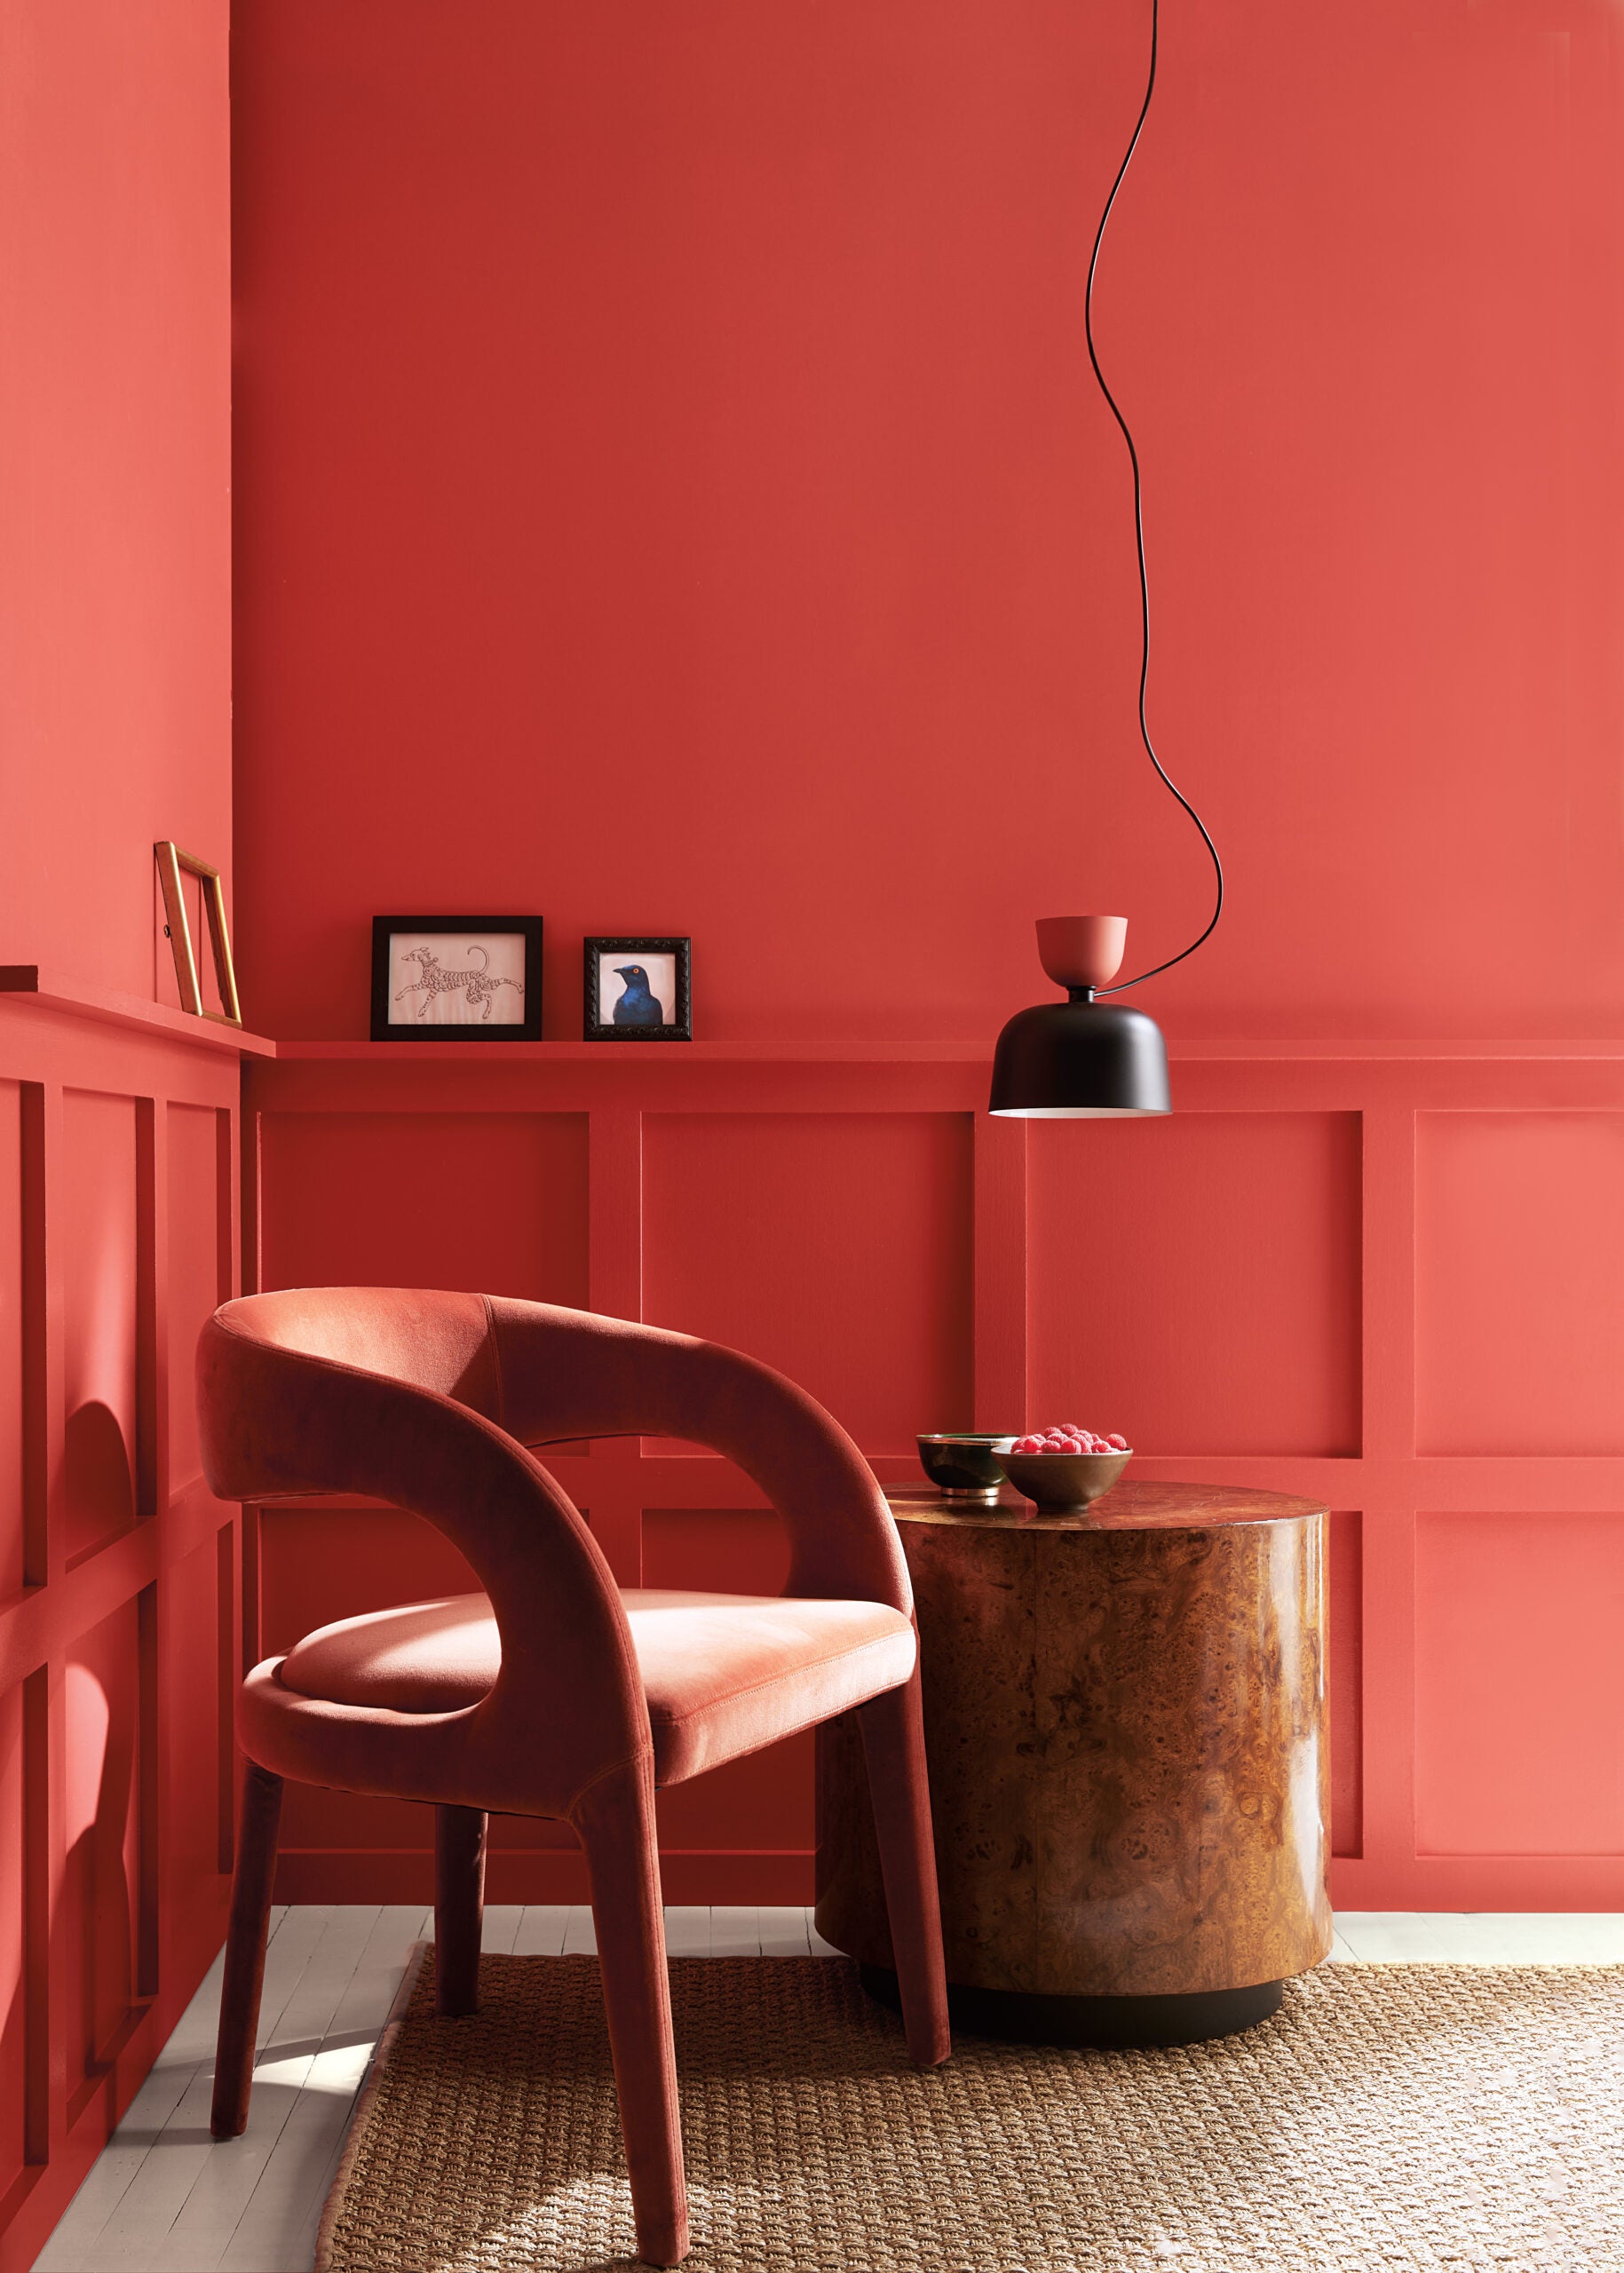 pink orange chair and walls